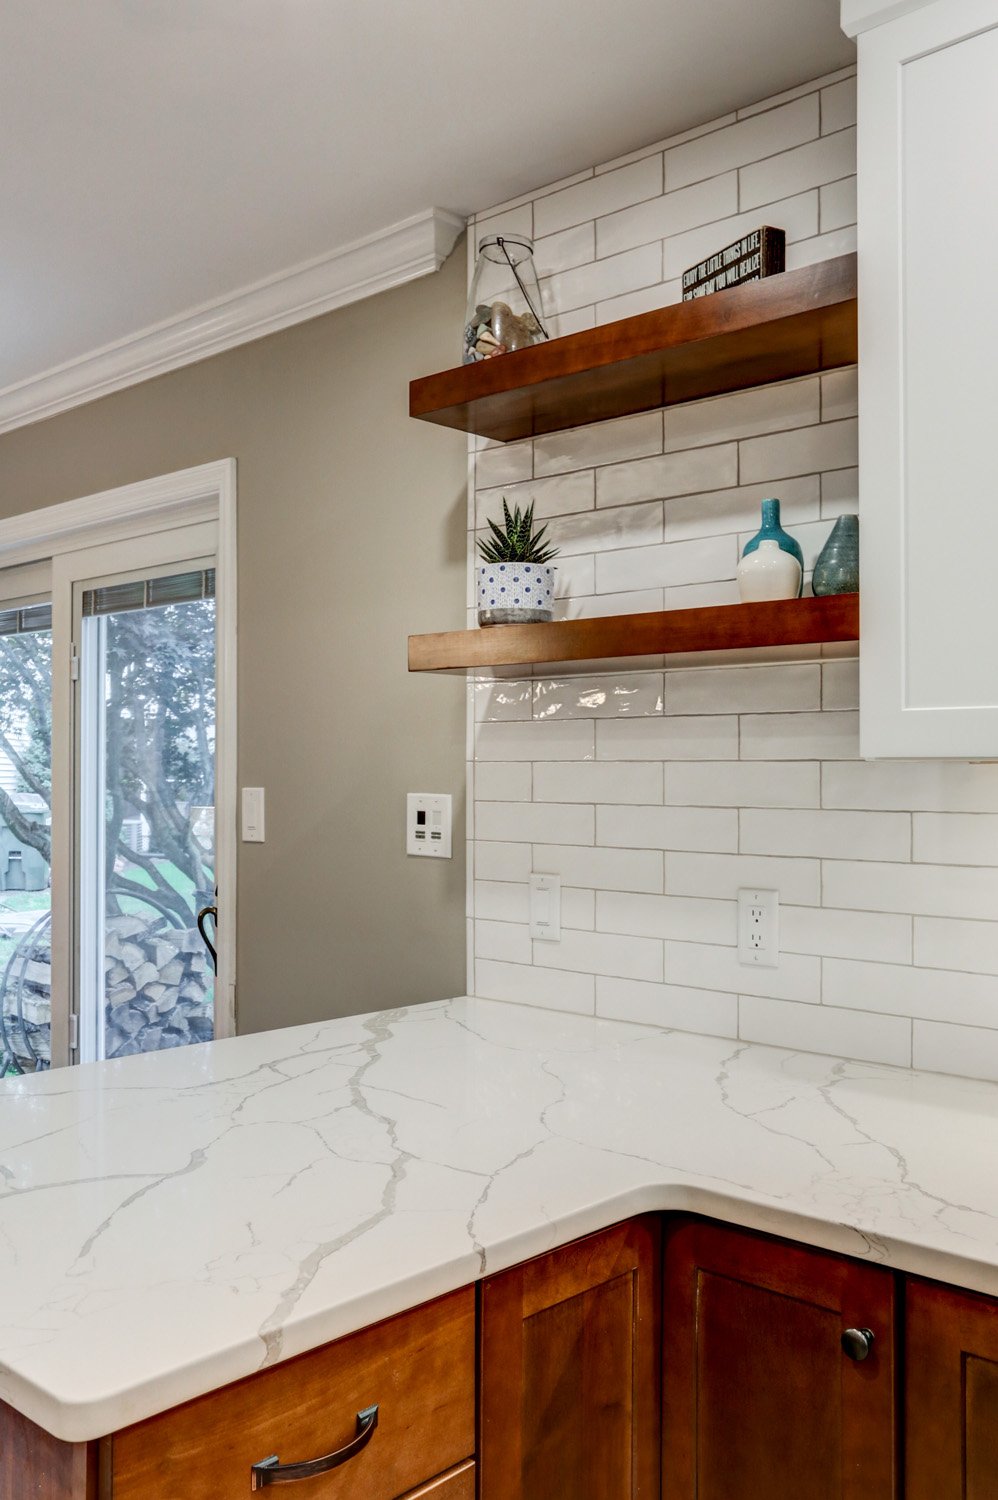 Lancaster Kitchen Remodel with Open Air Shelves and Tile